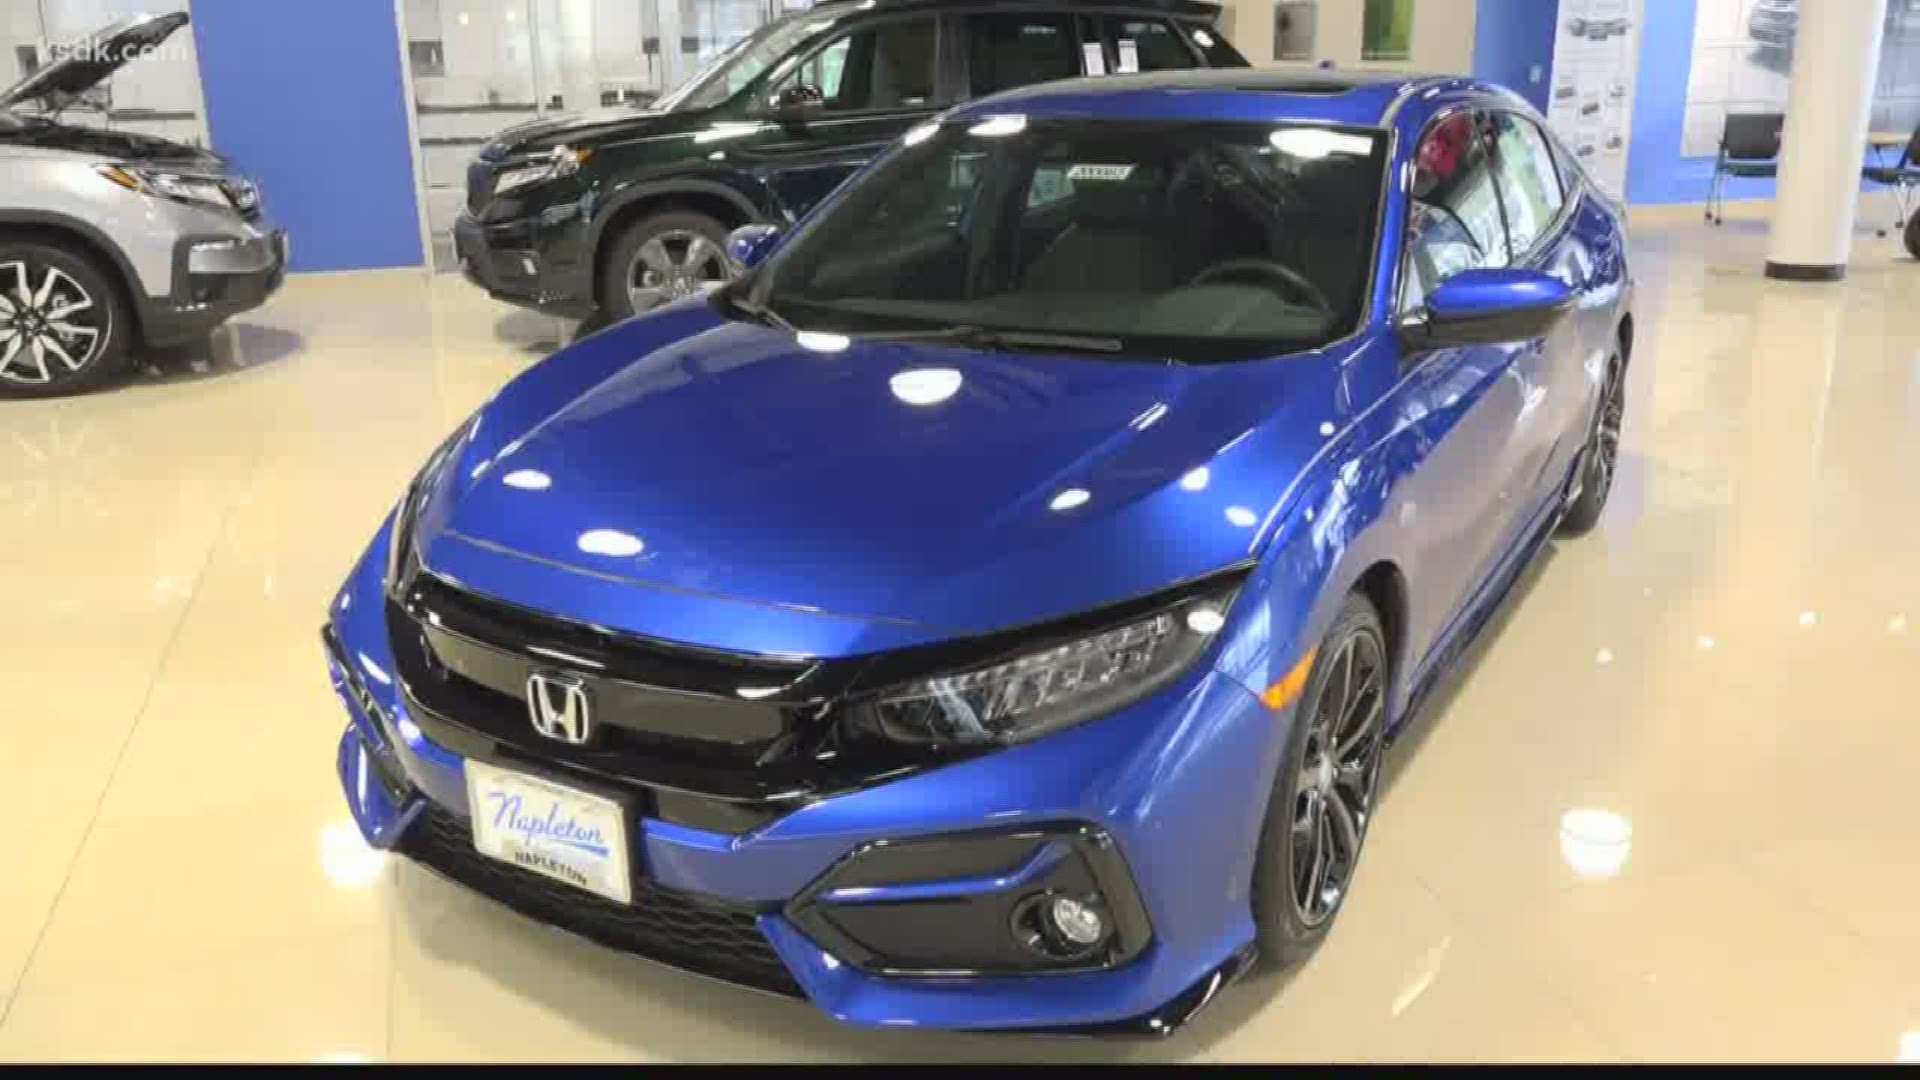 Let the friendly staff at Ed Napleton Honda help you find your next car.